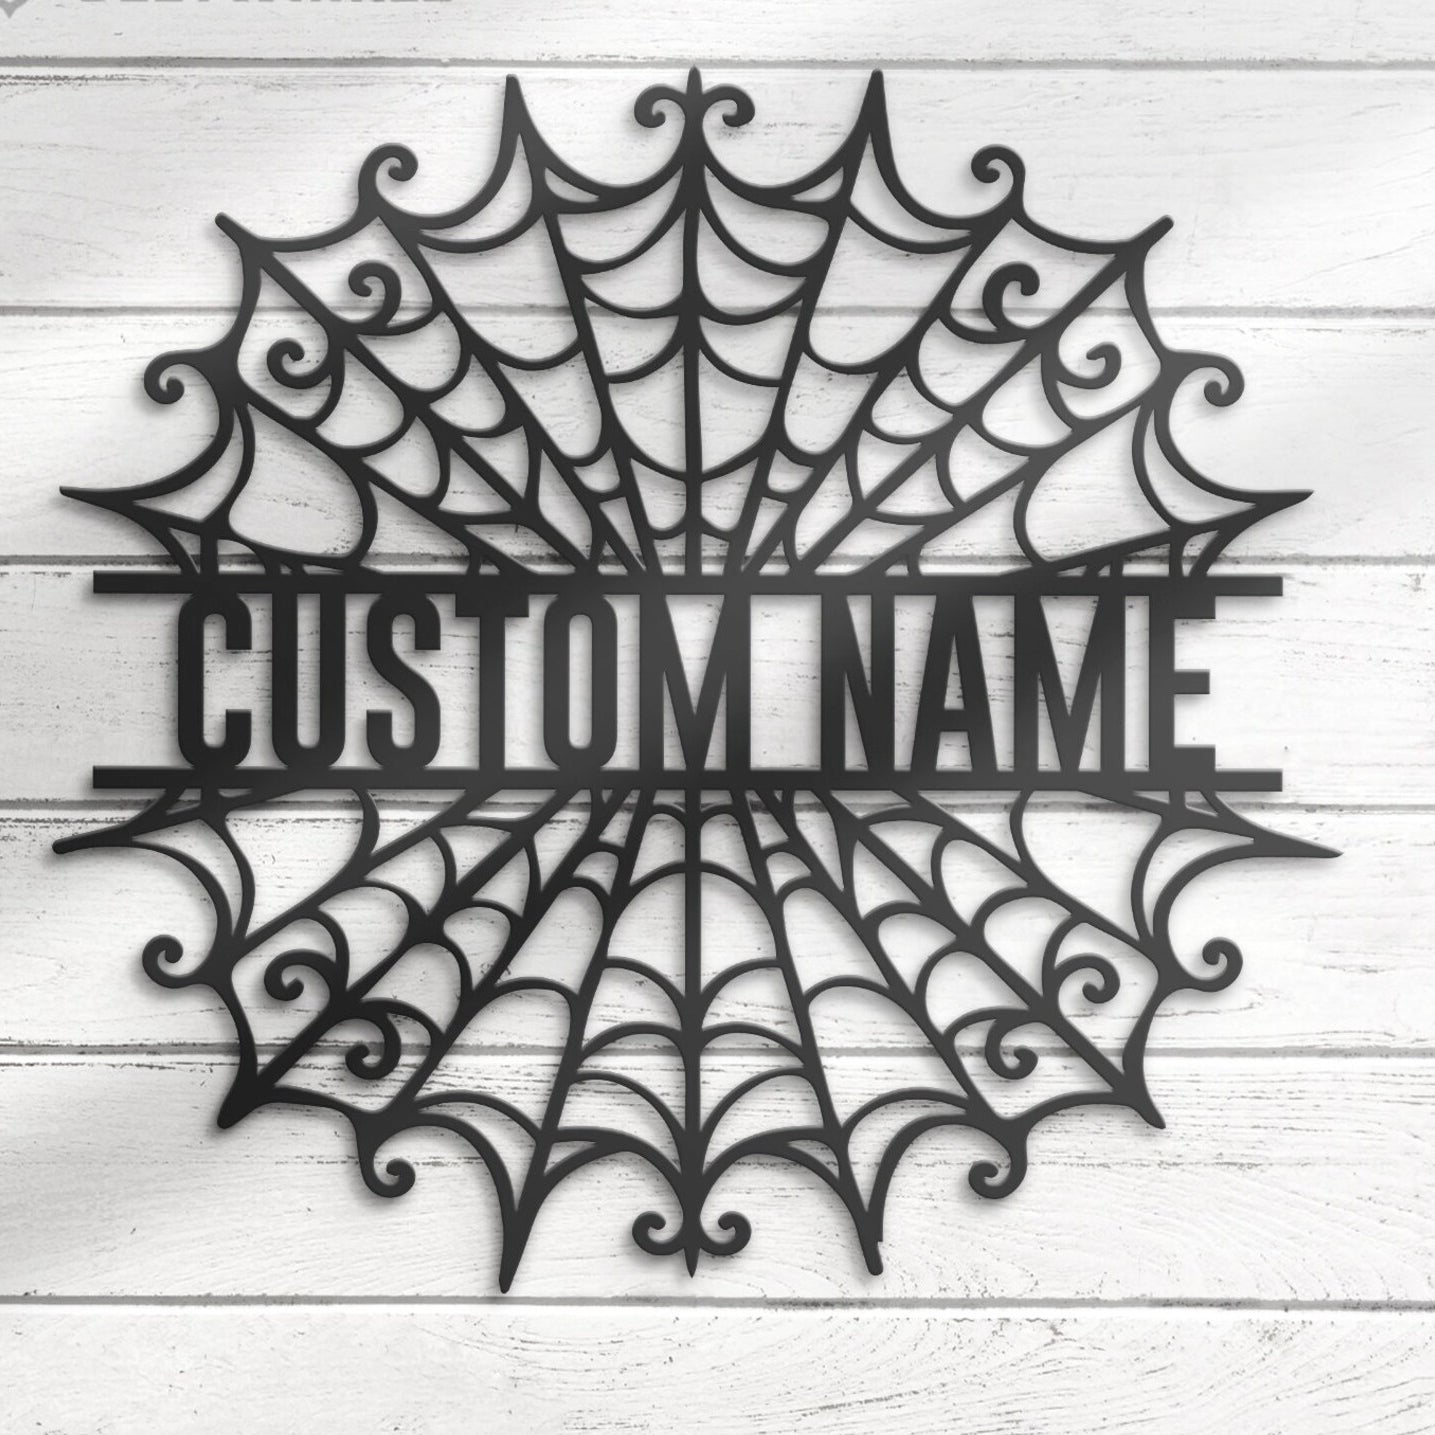 NEONIP-Personalized 100% Handmade Halloween Metal Sign LED Neon Sign with Spider